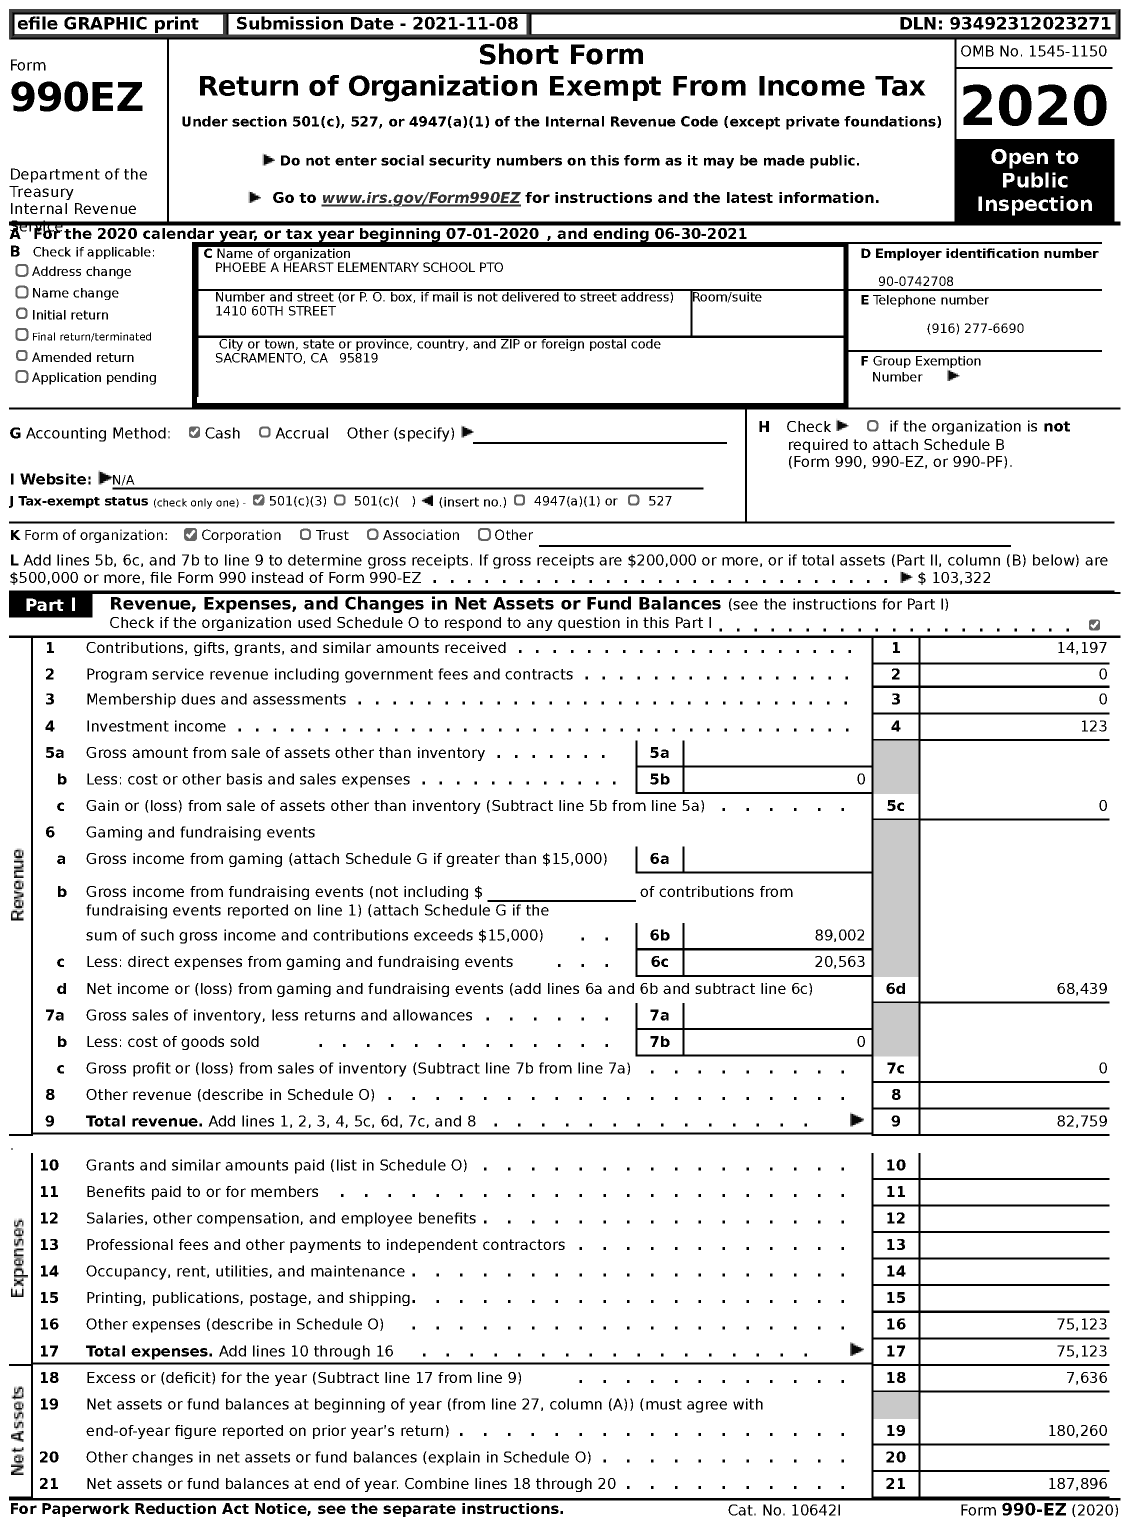 Image of first page of 2020 Form 990EZ for Phoebe A Hearst Elementary School Pto